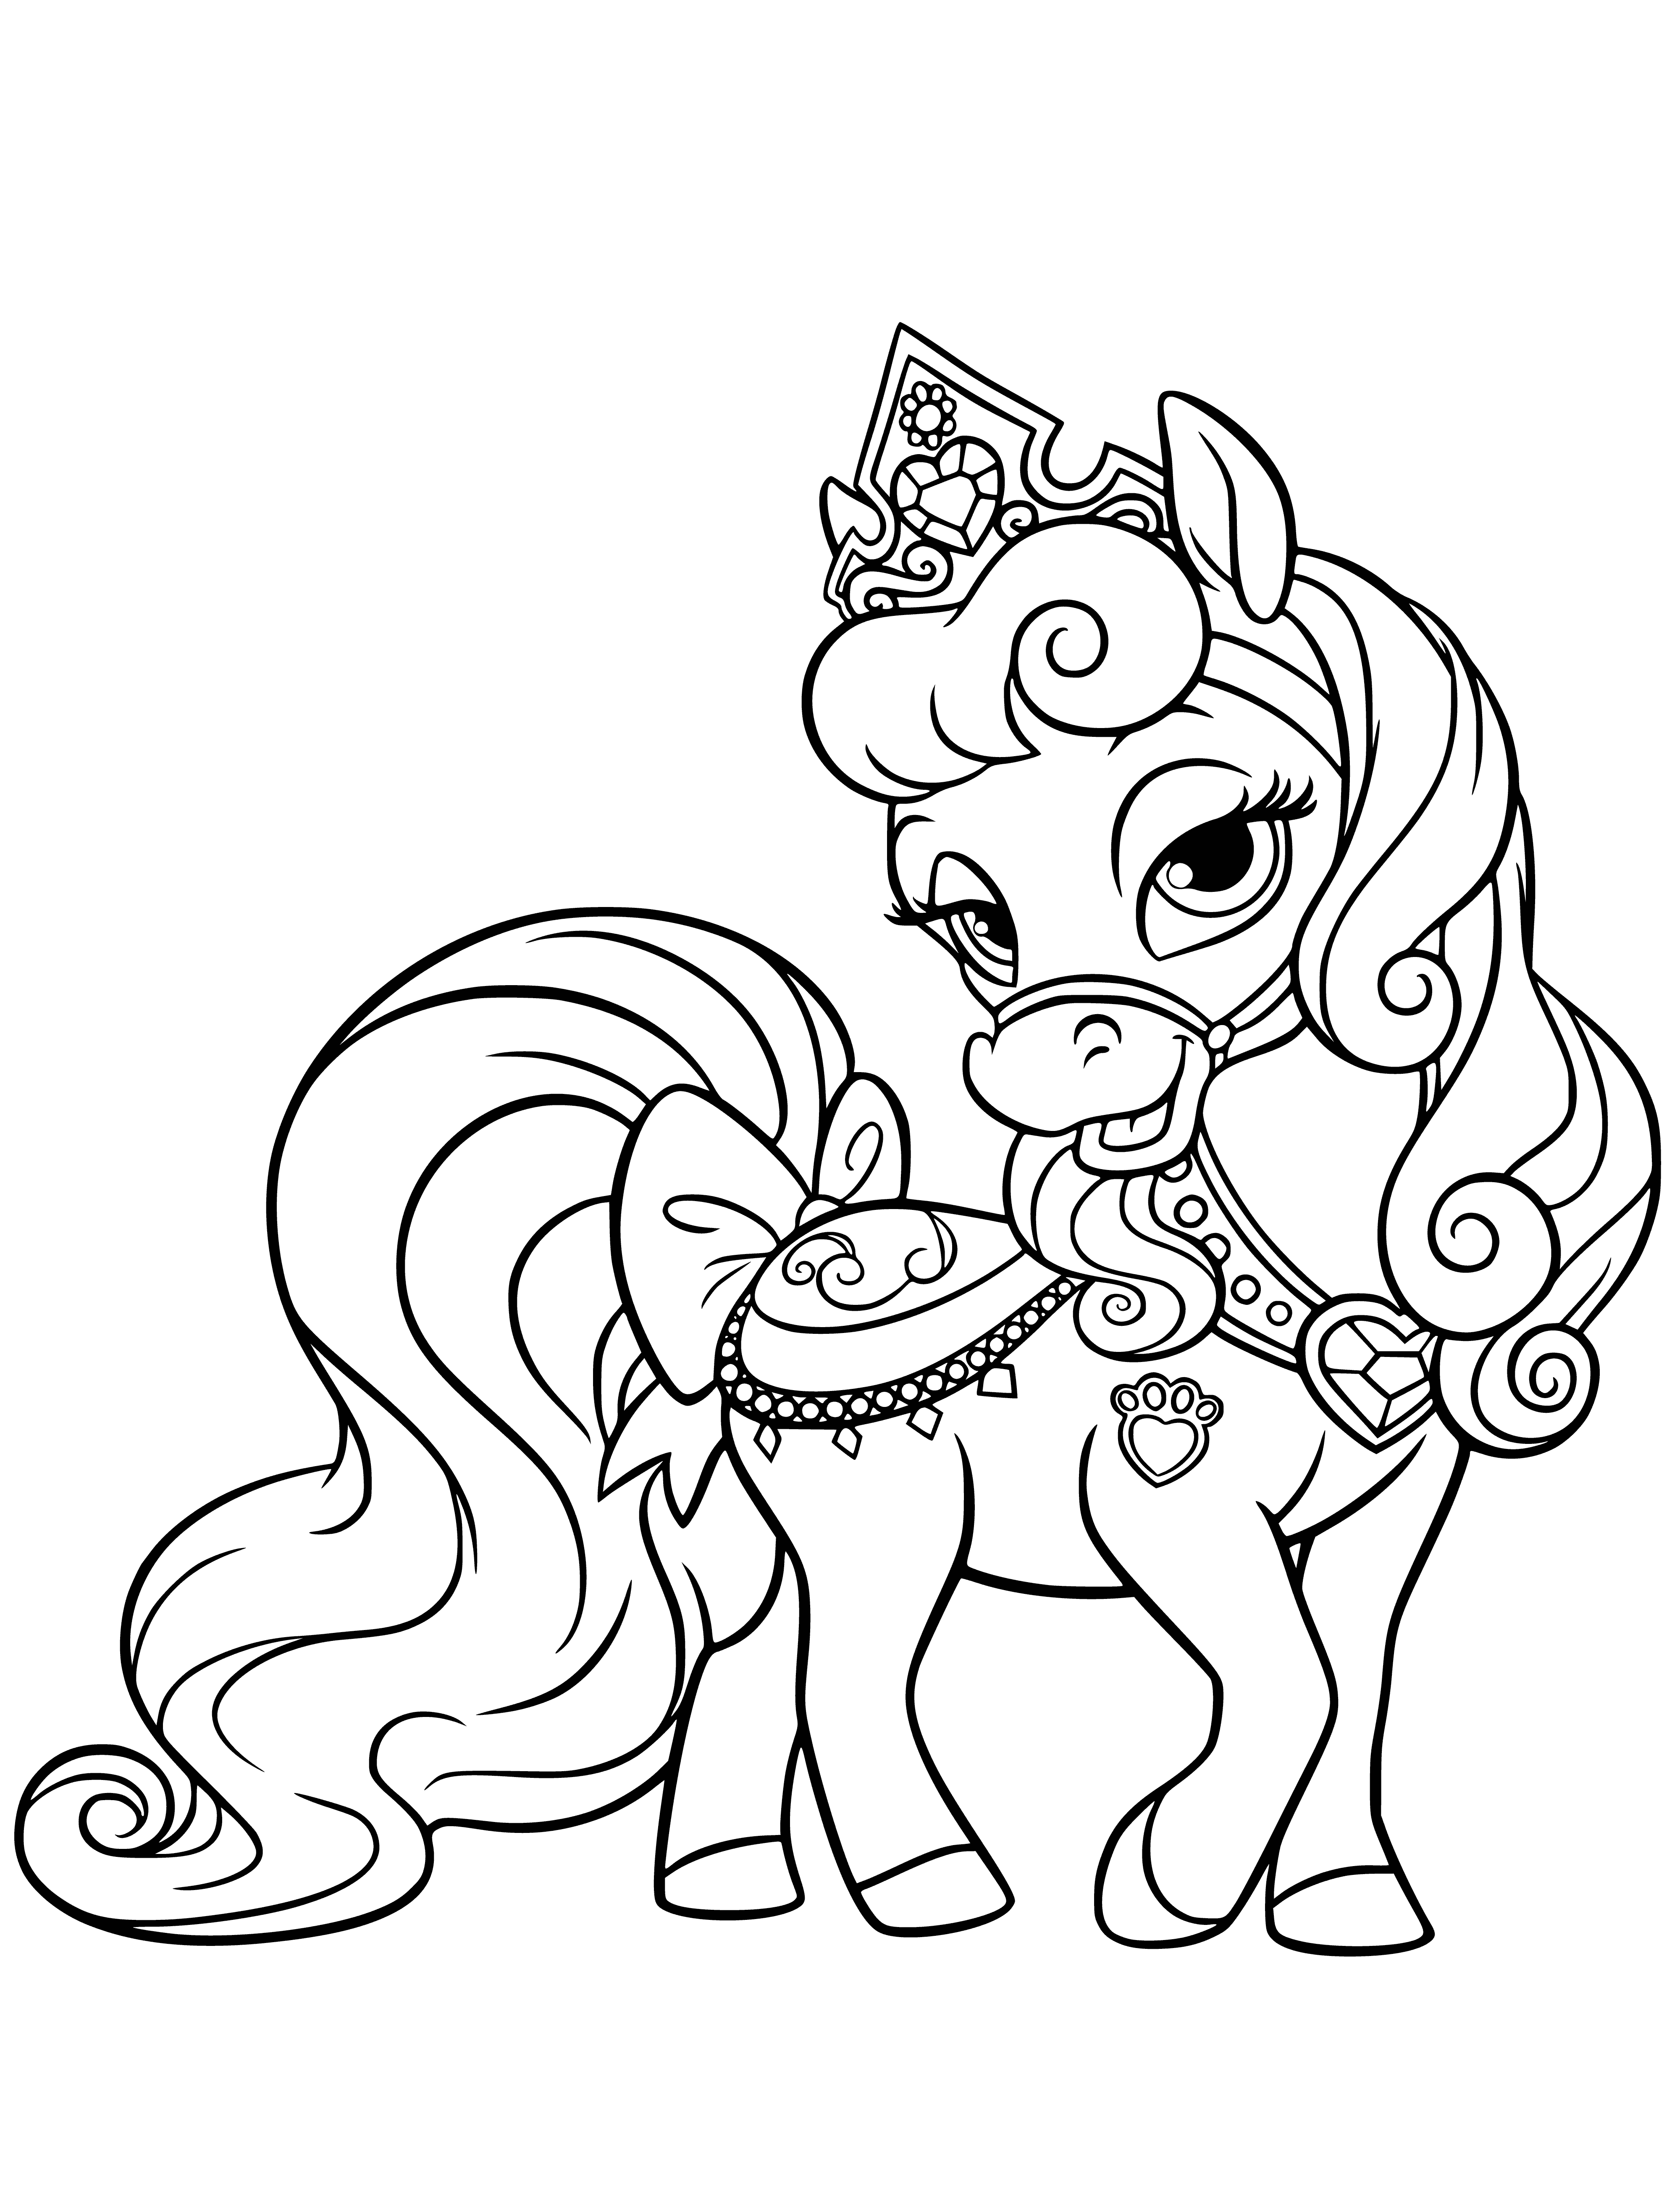 coloring page: Princess Aurora pets a small, brown pony with white mane & tail in a field of green grass in the coloring page.